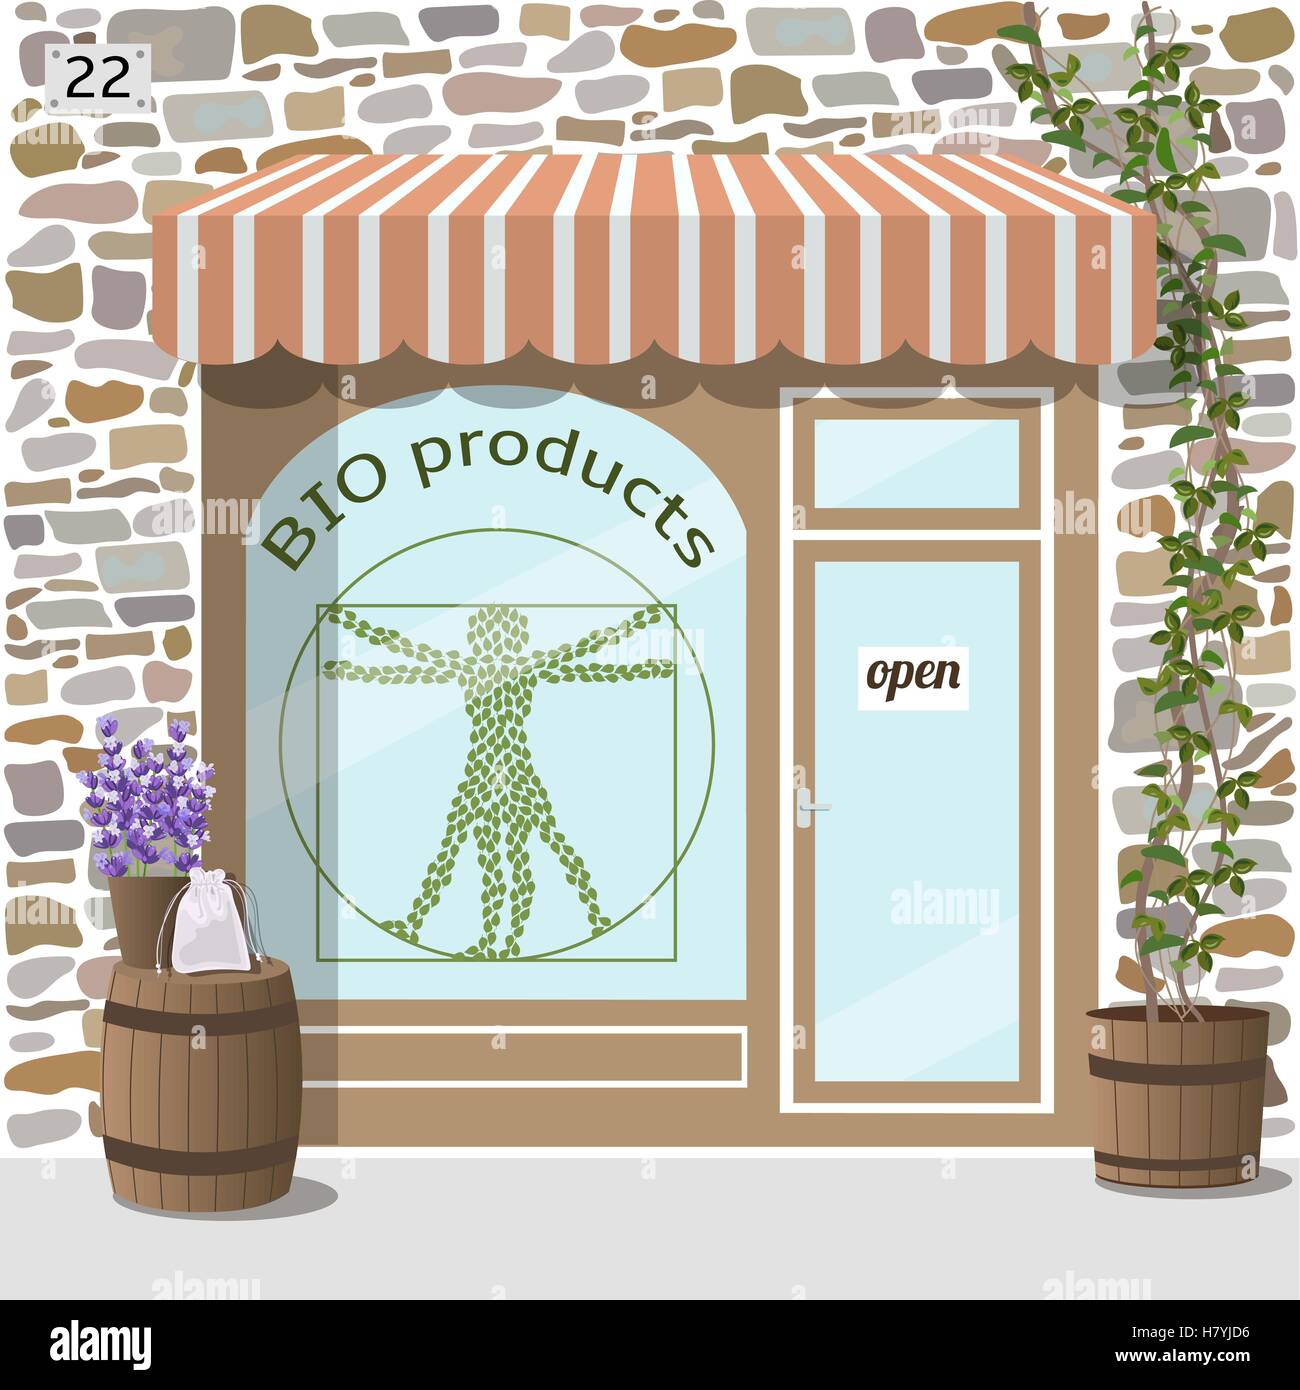 Bio products shop. Organic products store. Stock Vector